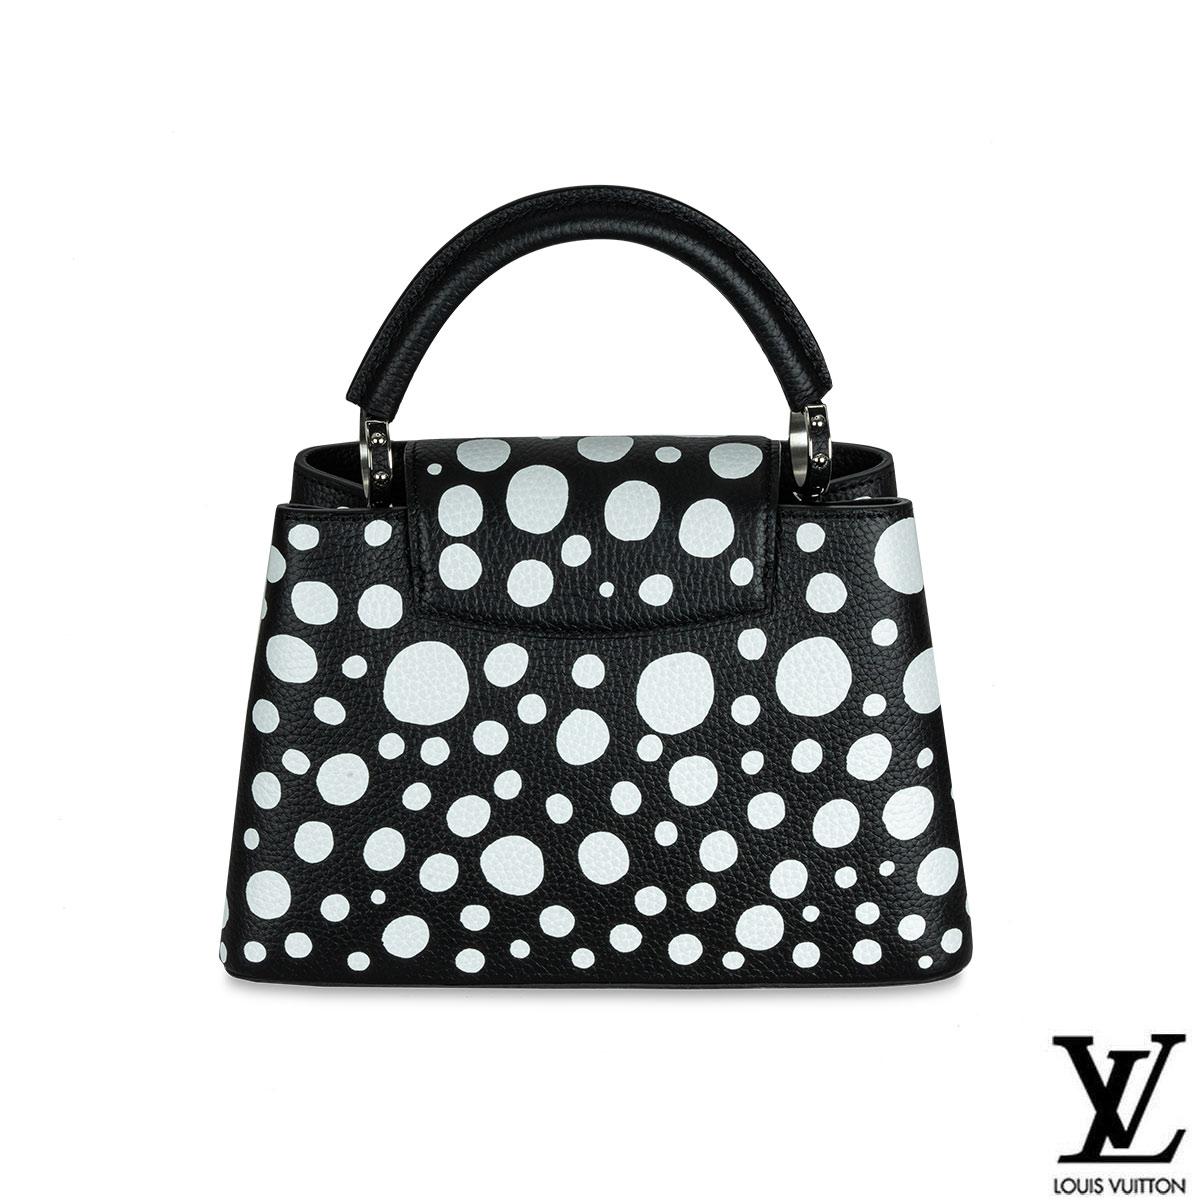 Louis Vuitton x Yayoi Kusama Capucine MM Bag In Excellent Condition For Sale In London, GB